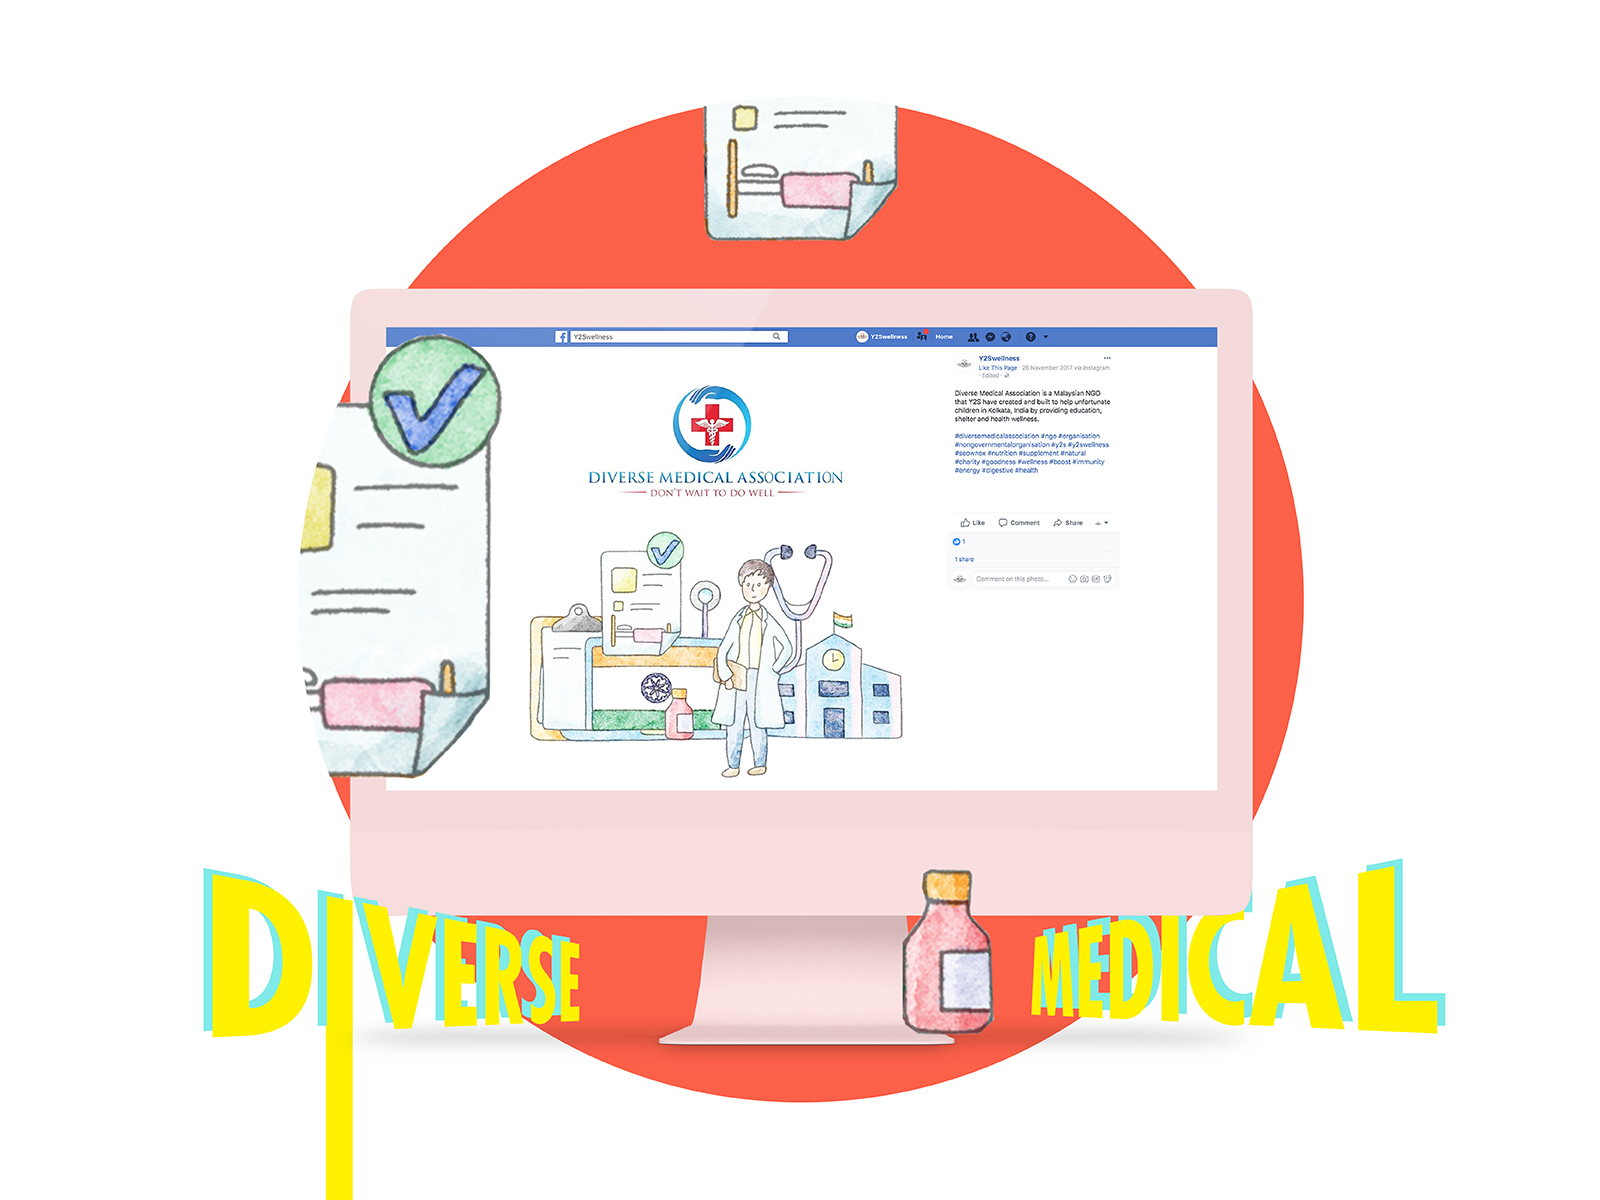 Y2S Wellness social media management post illustration of their affiliation with Diverse Medical Association featured on Facebook viewed on a desktop with a round red element behind it